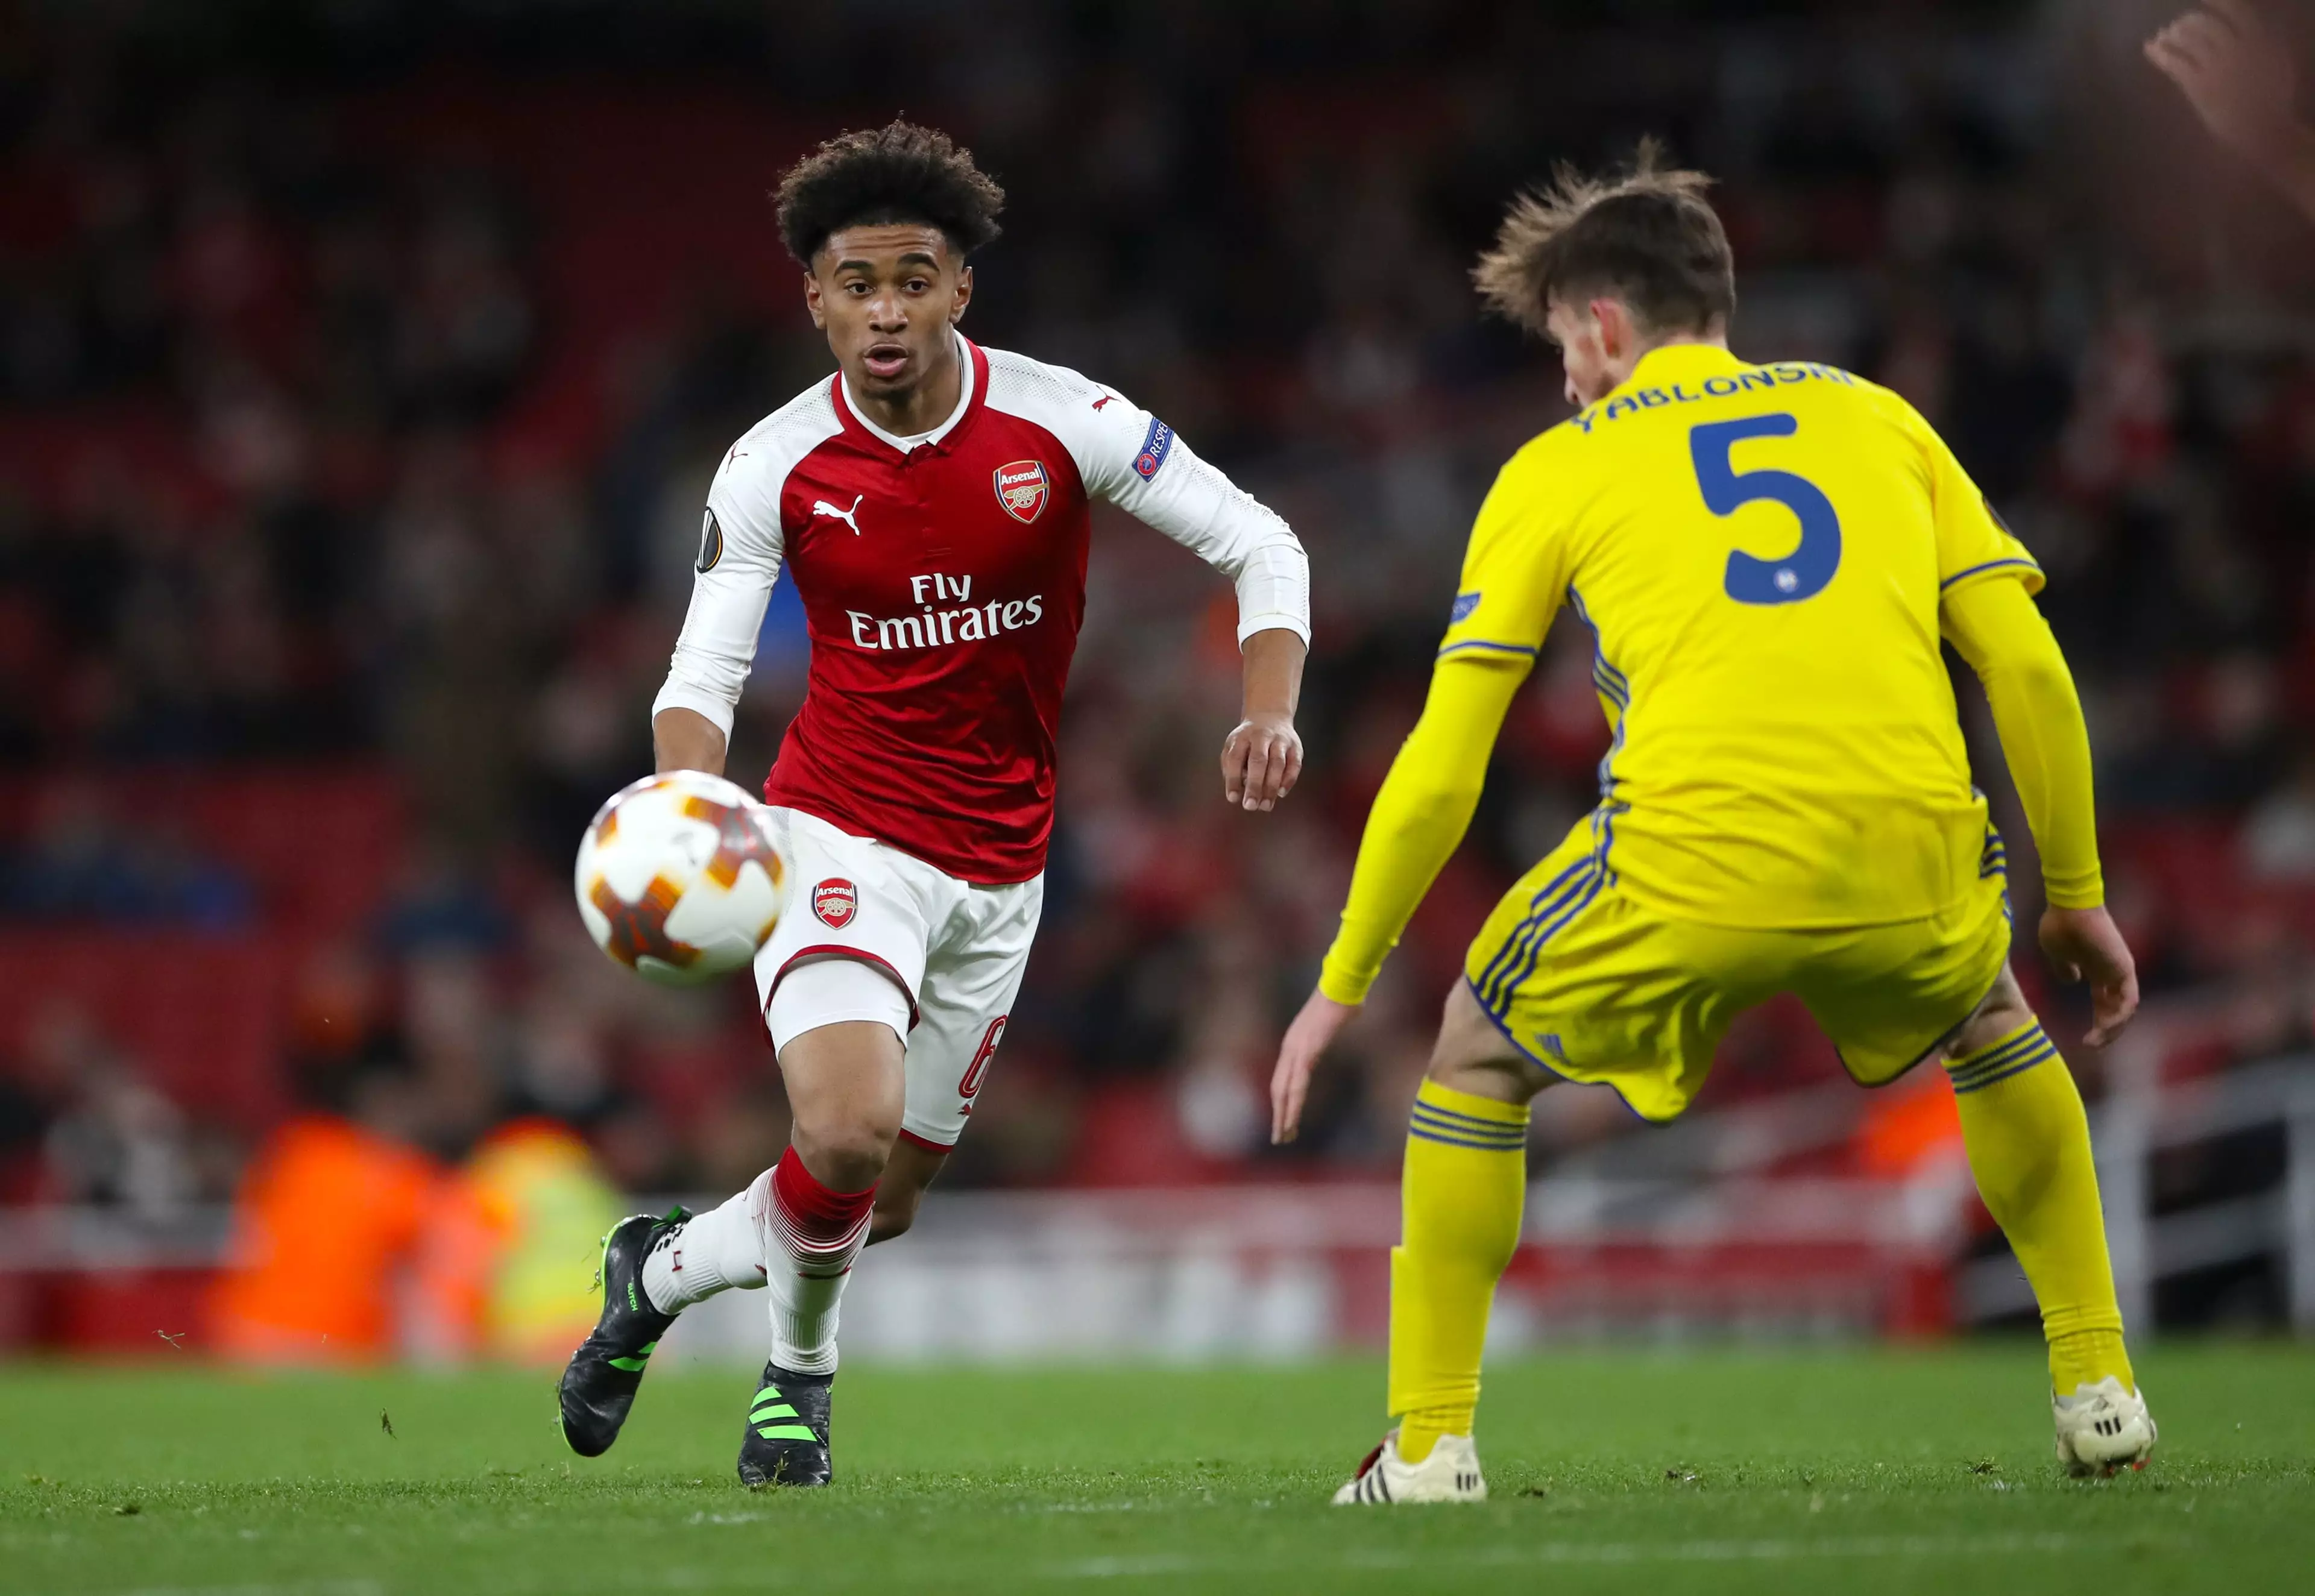 Reiss Nelson in action in the Europa League. Image: PA Images.